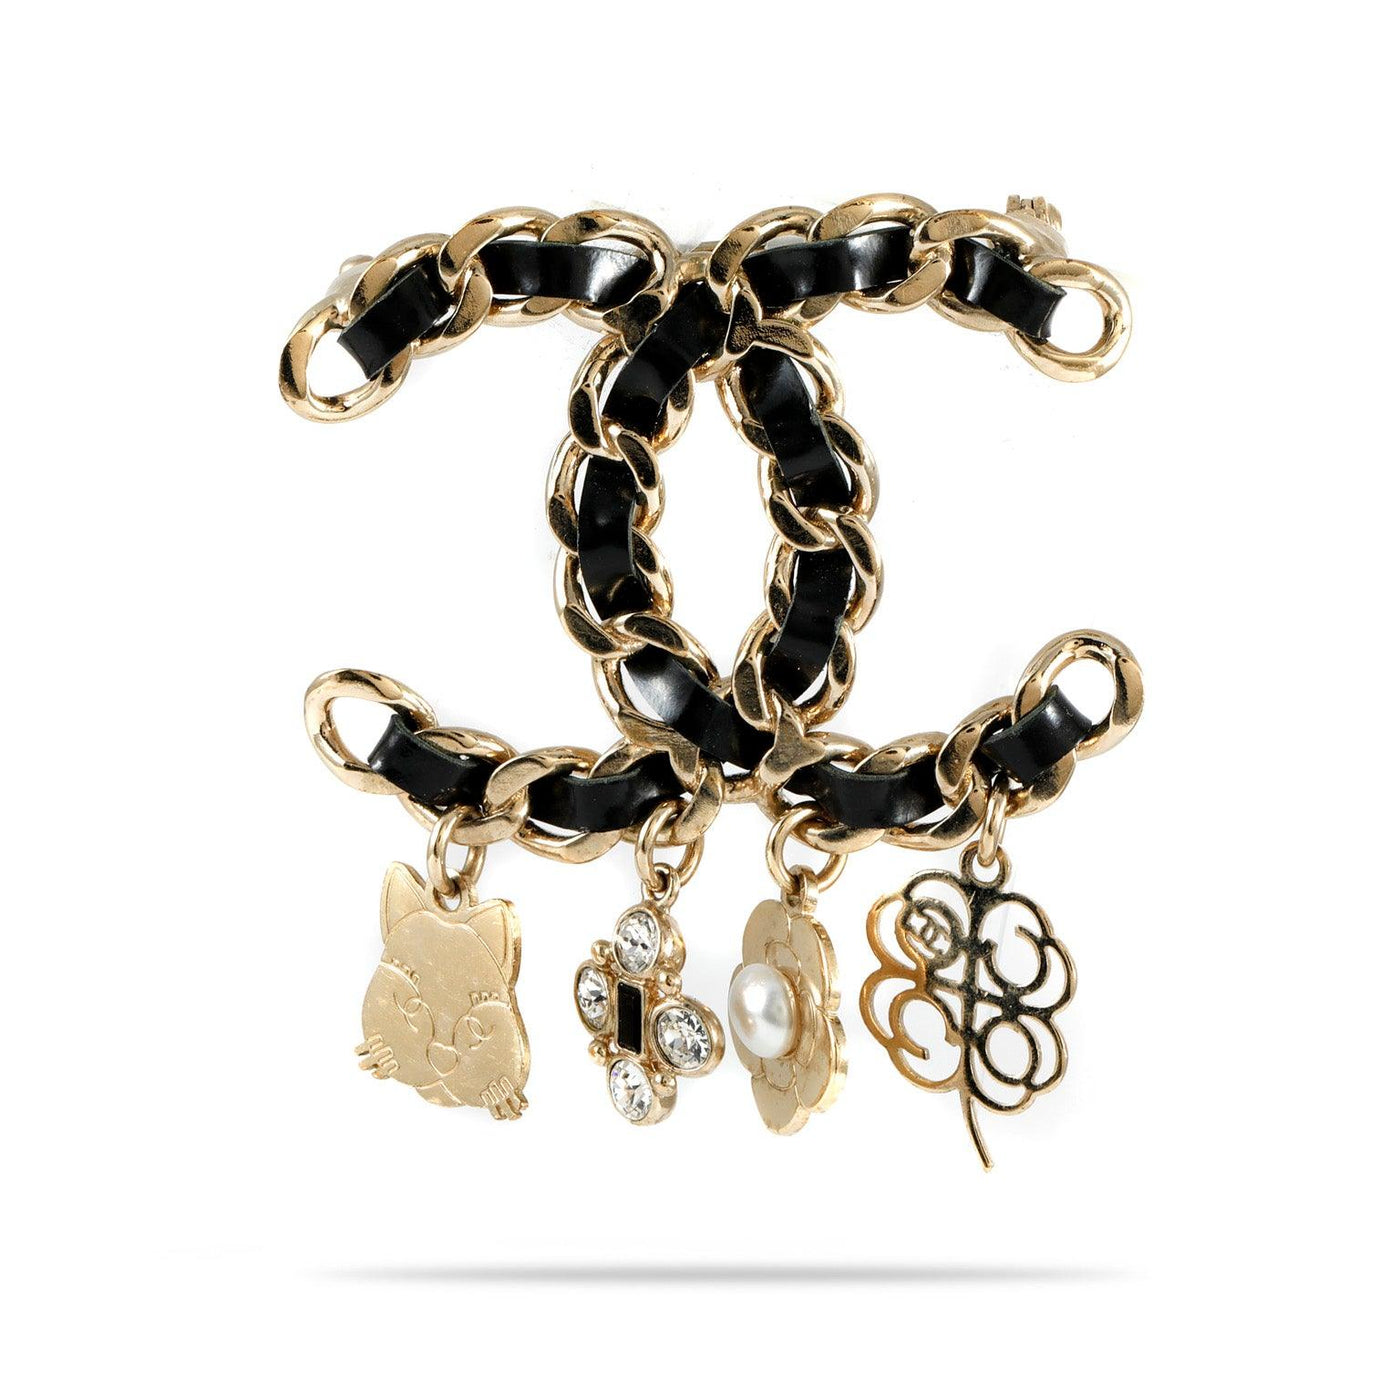 Chanel Black Leather CC Charms Brooch - Only Authentics